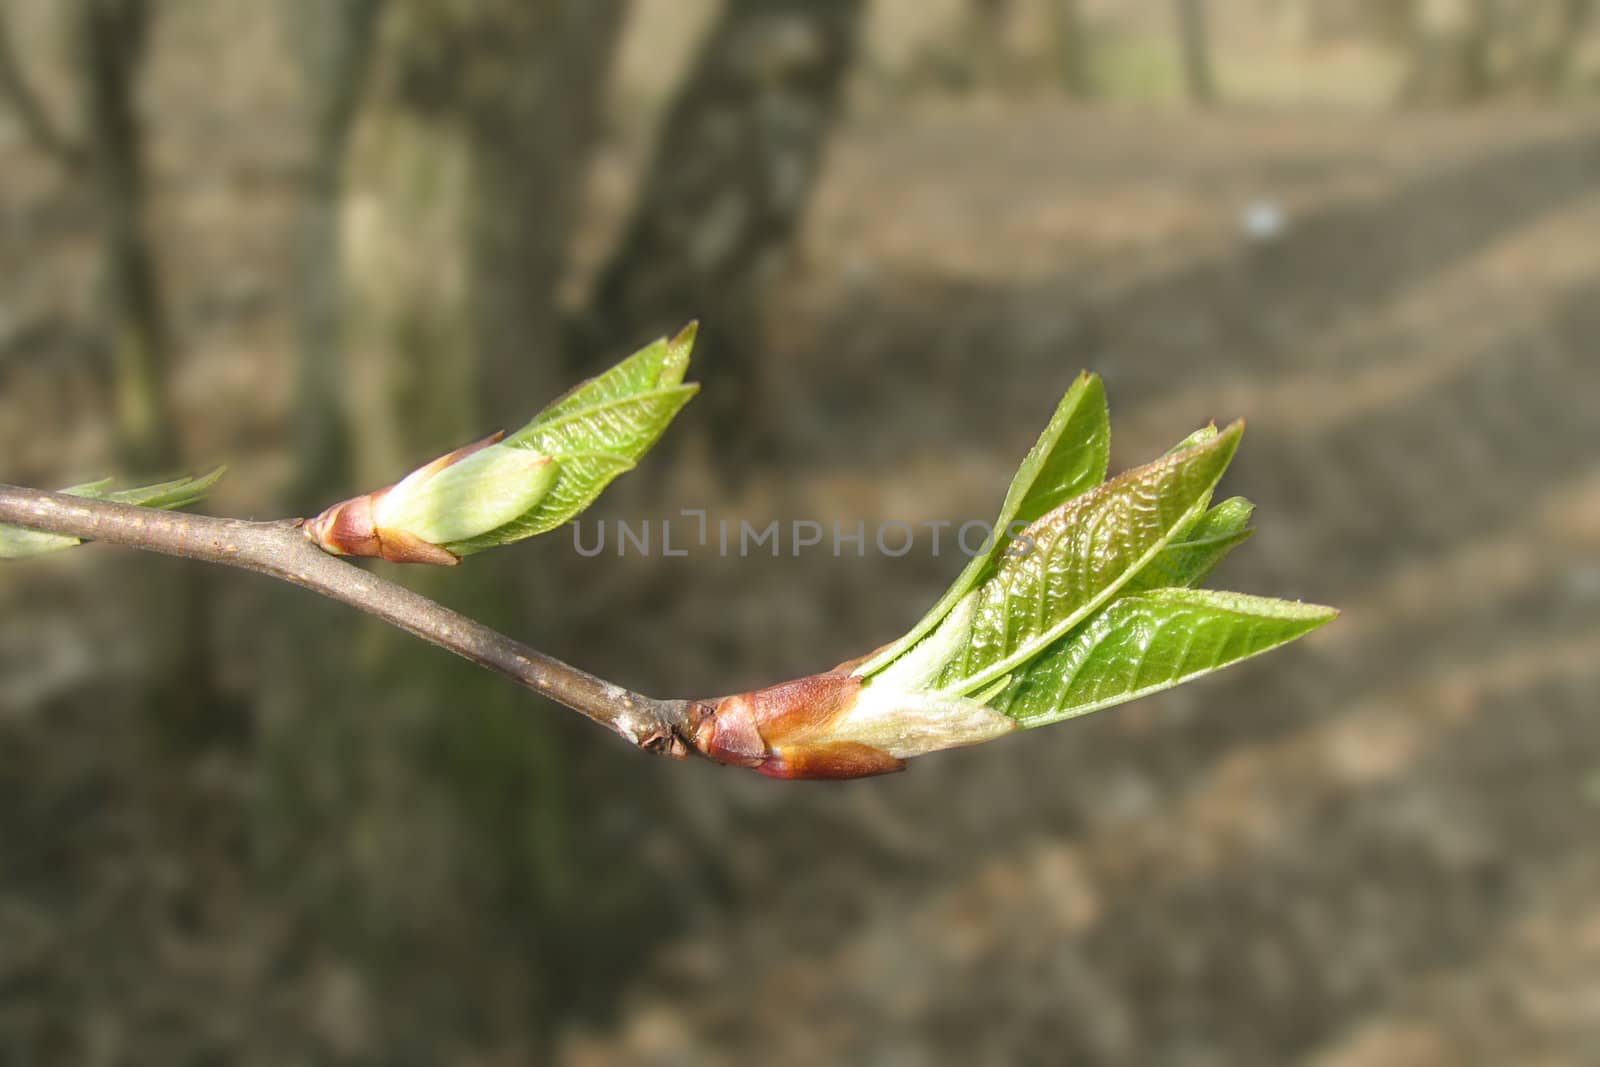 The close-up of young leaves in the spring